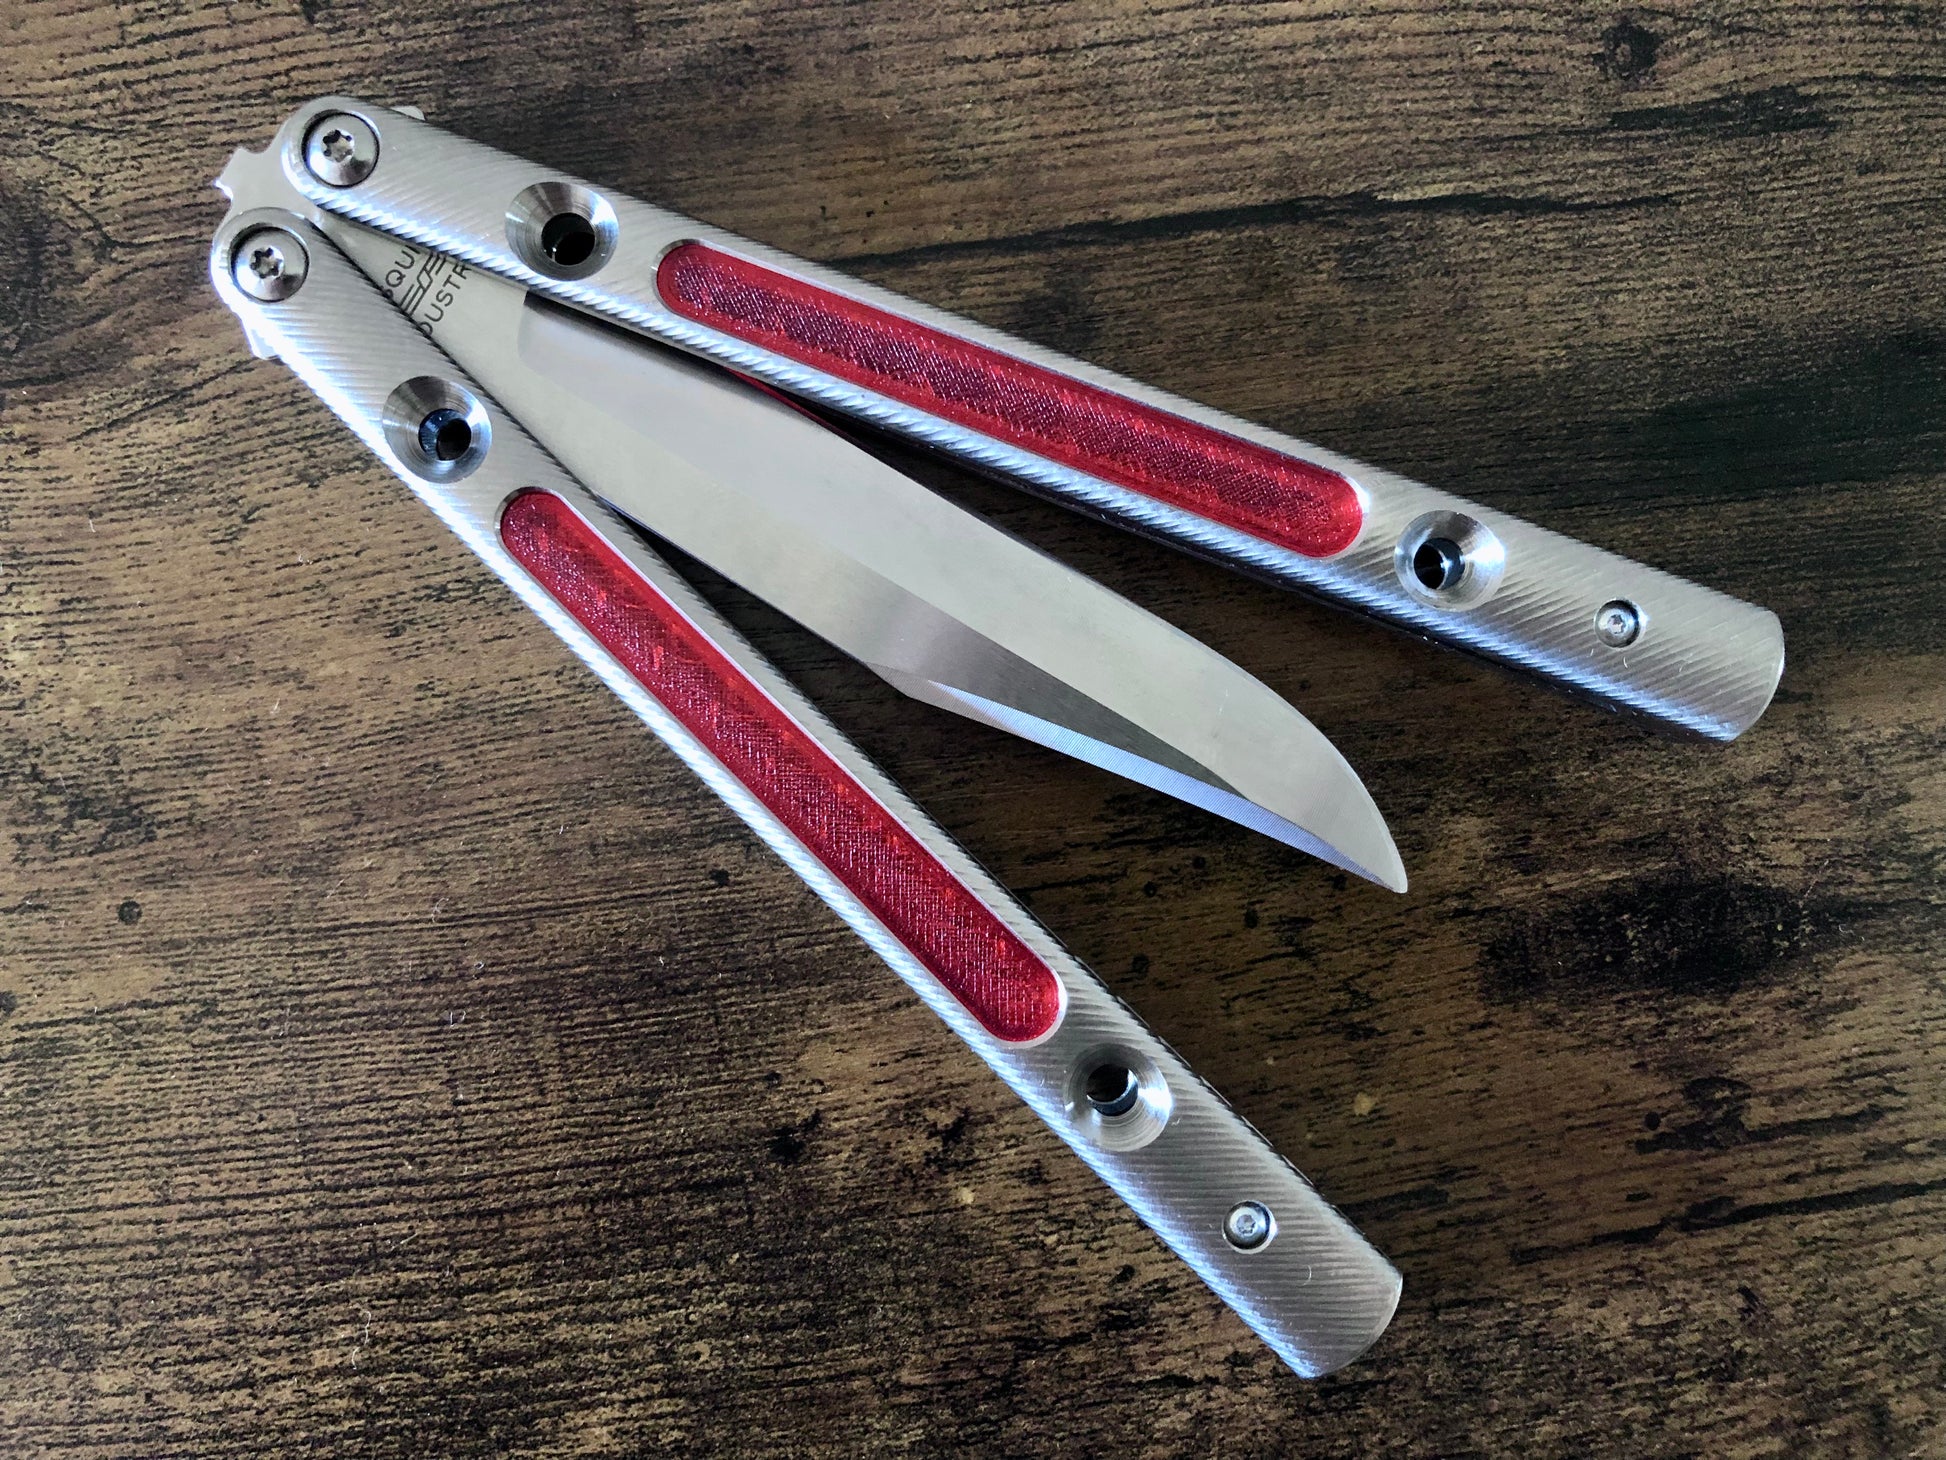 Add grip, comfort, and eliminate ring with these Zippy polyurethane handle inlays designed to fit the titanium Squiggle handles for the Squid Industries Krake Raken balisong.